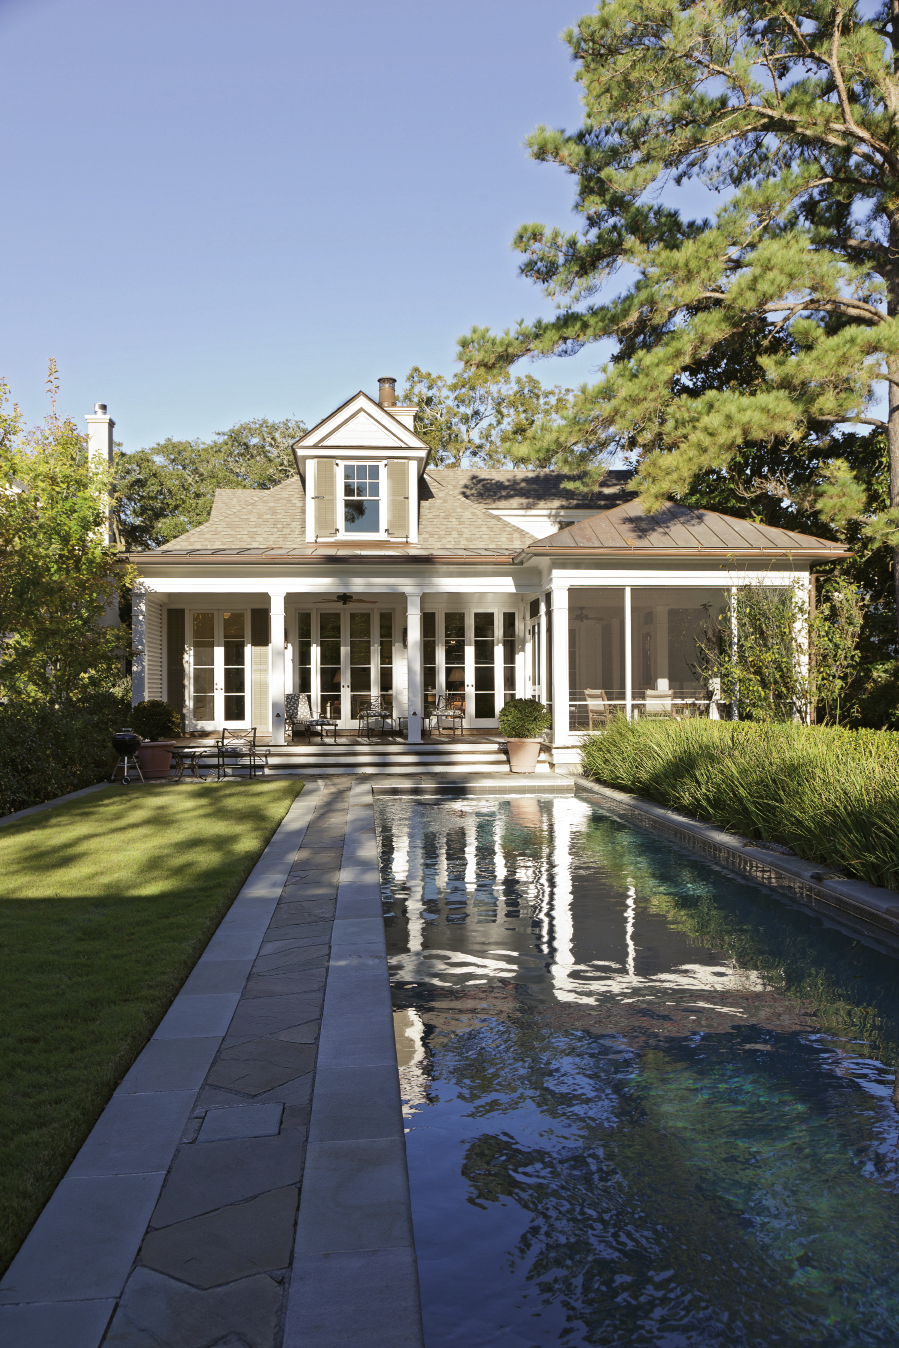 The lawn and pool area are seamless extensions of the house, which was designed by Dufford Young Architects.